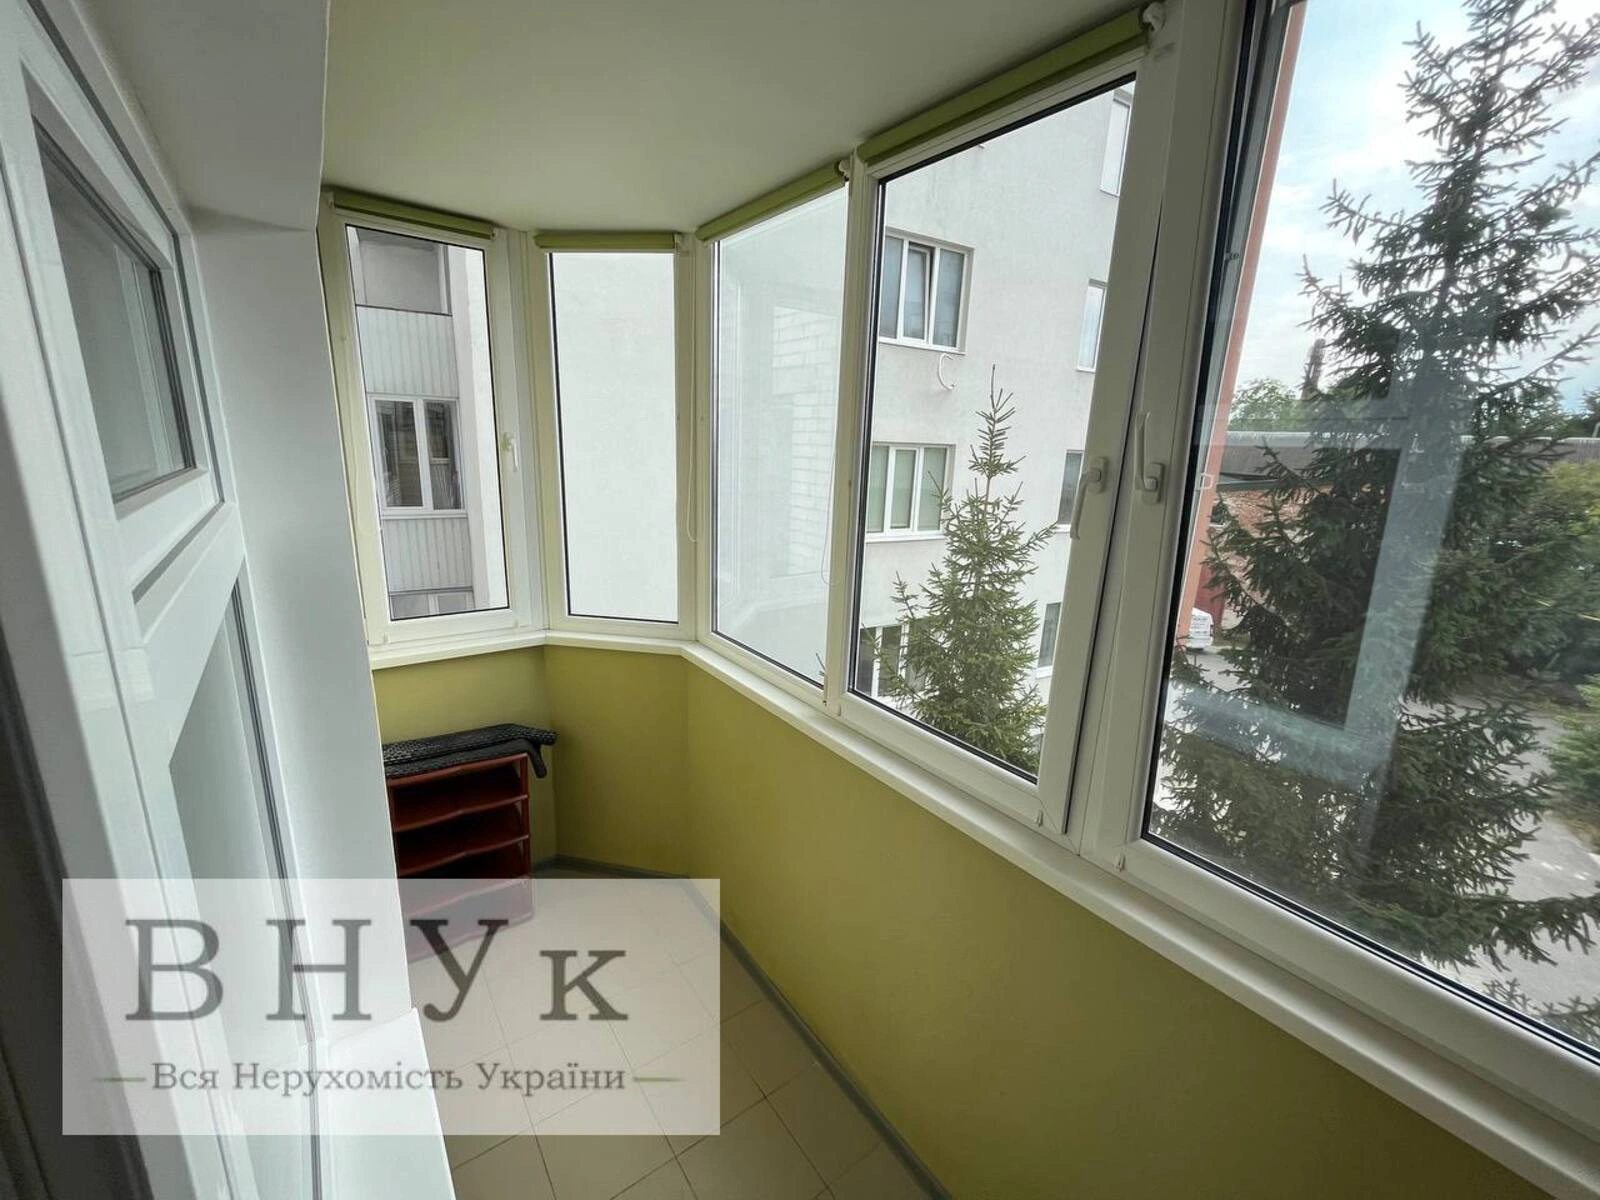 Apartments for sale. 2 rooms, 62 m², 3rd floor/10 floors. 5, Troleybusna vul., Ternopil. 